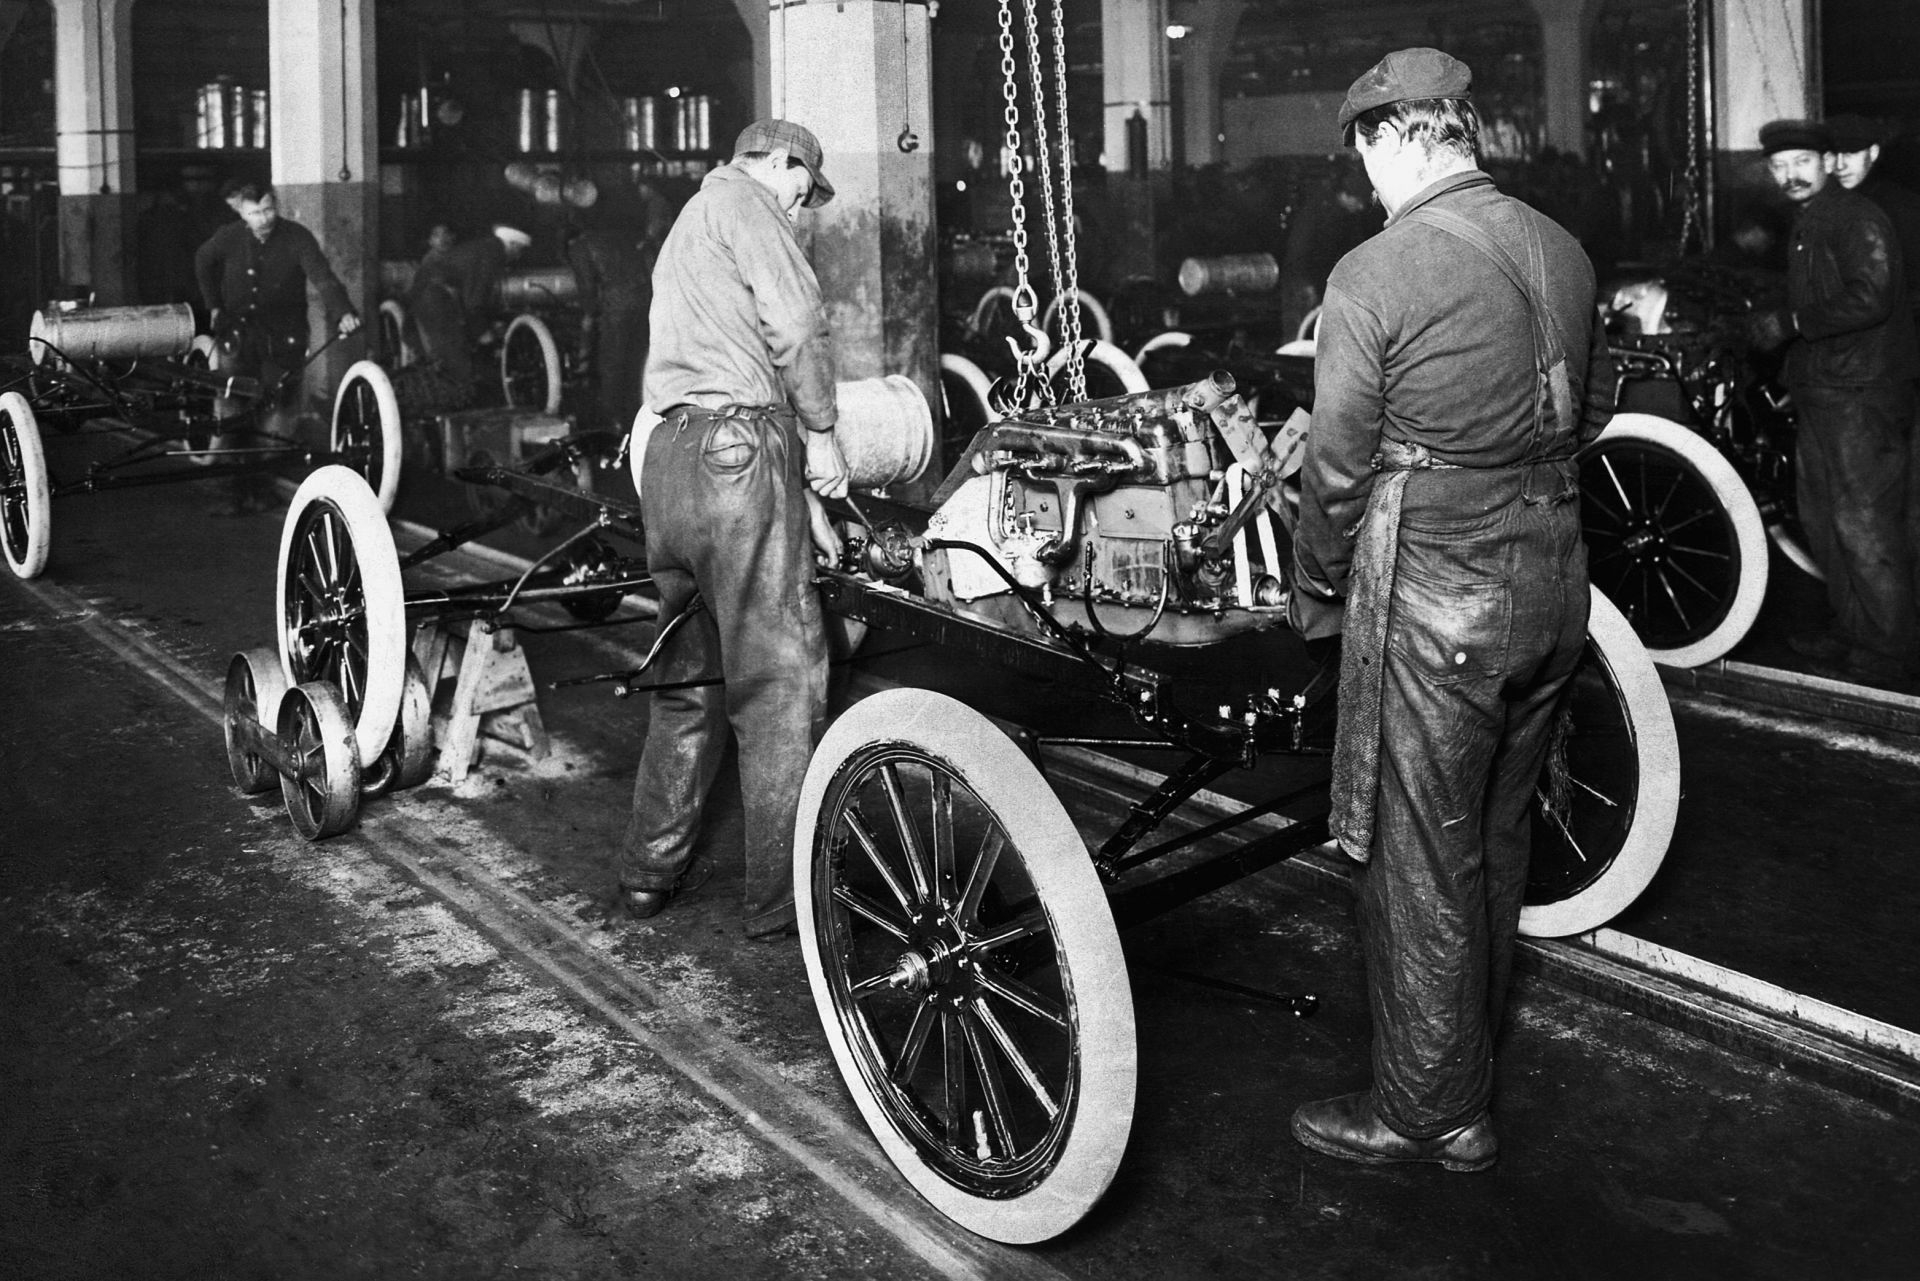 Henry Ford can still teach us a thing or two about business